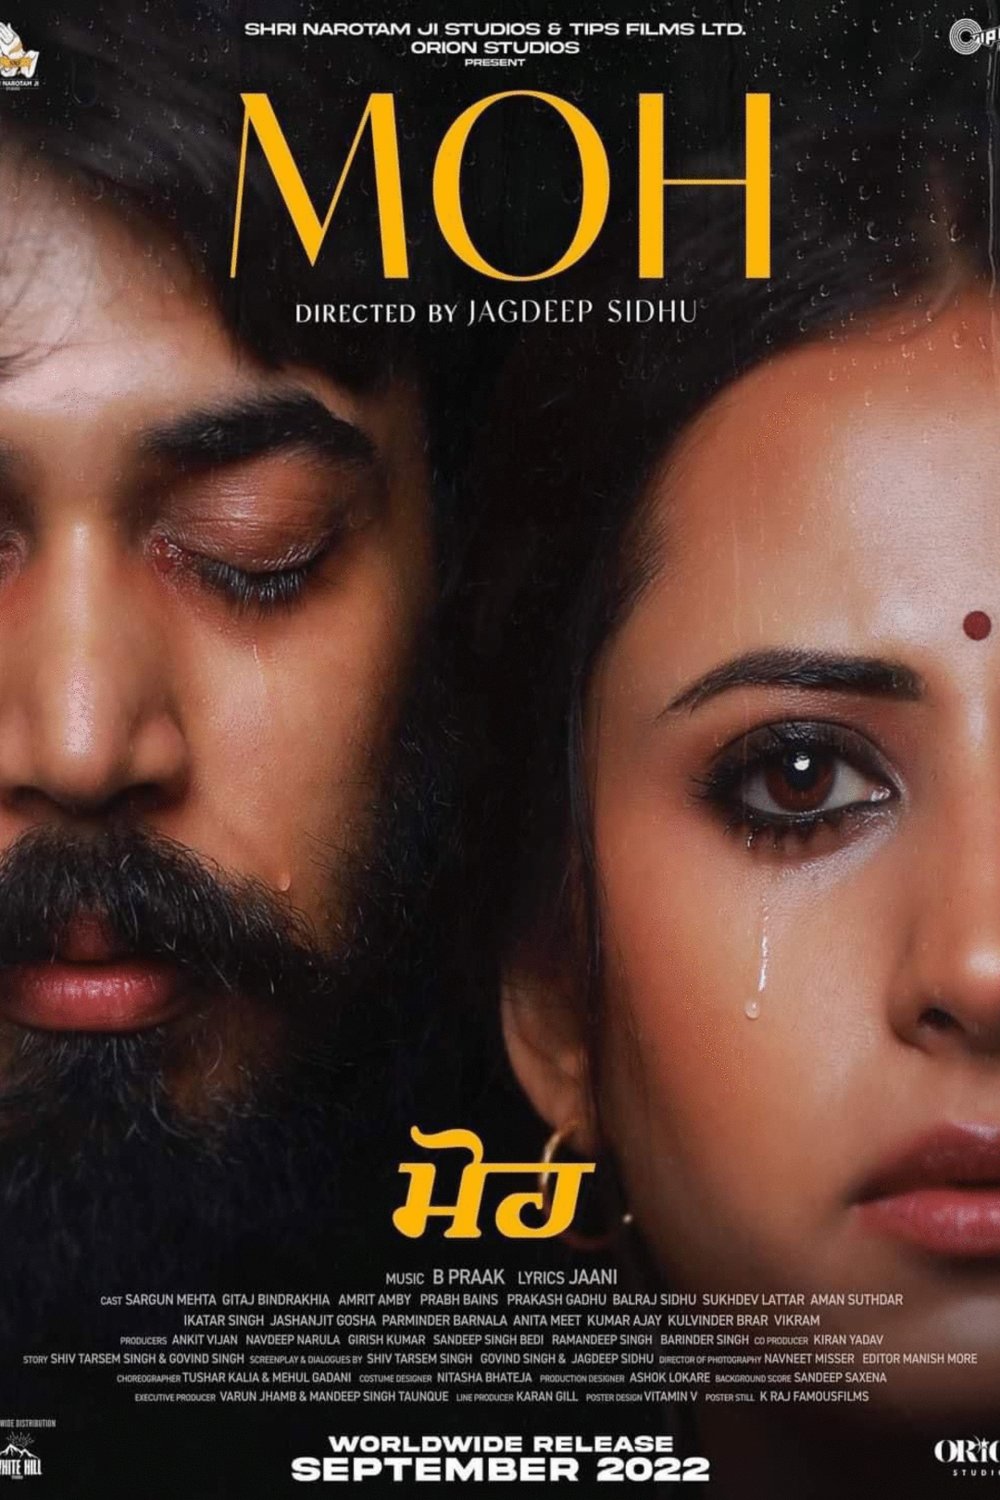 Punjabi poster of the movie Moh